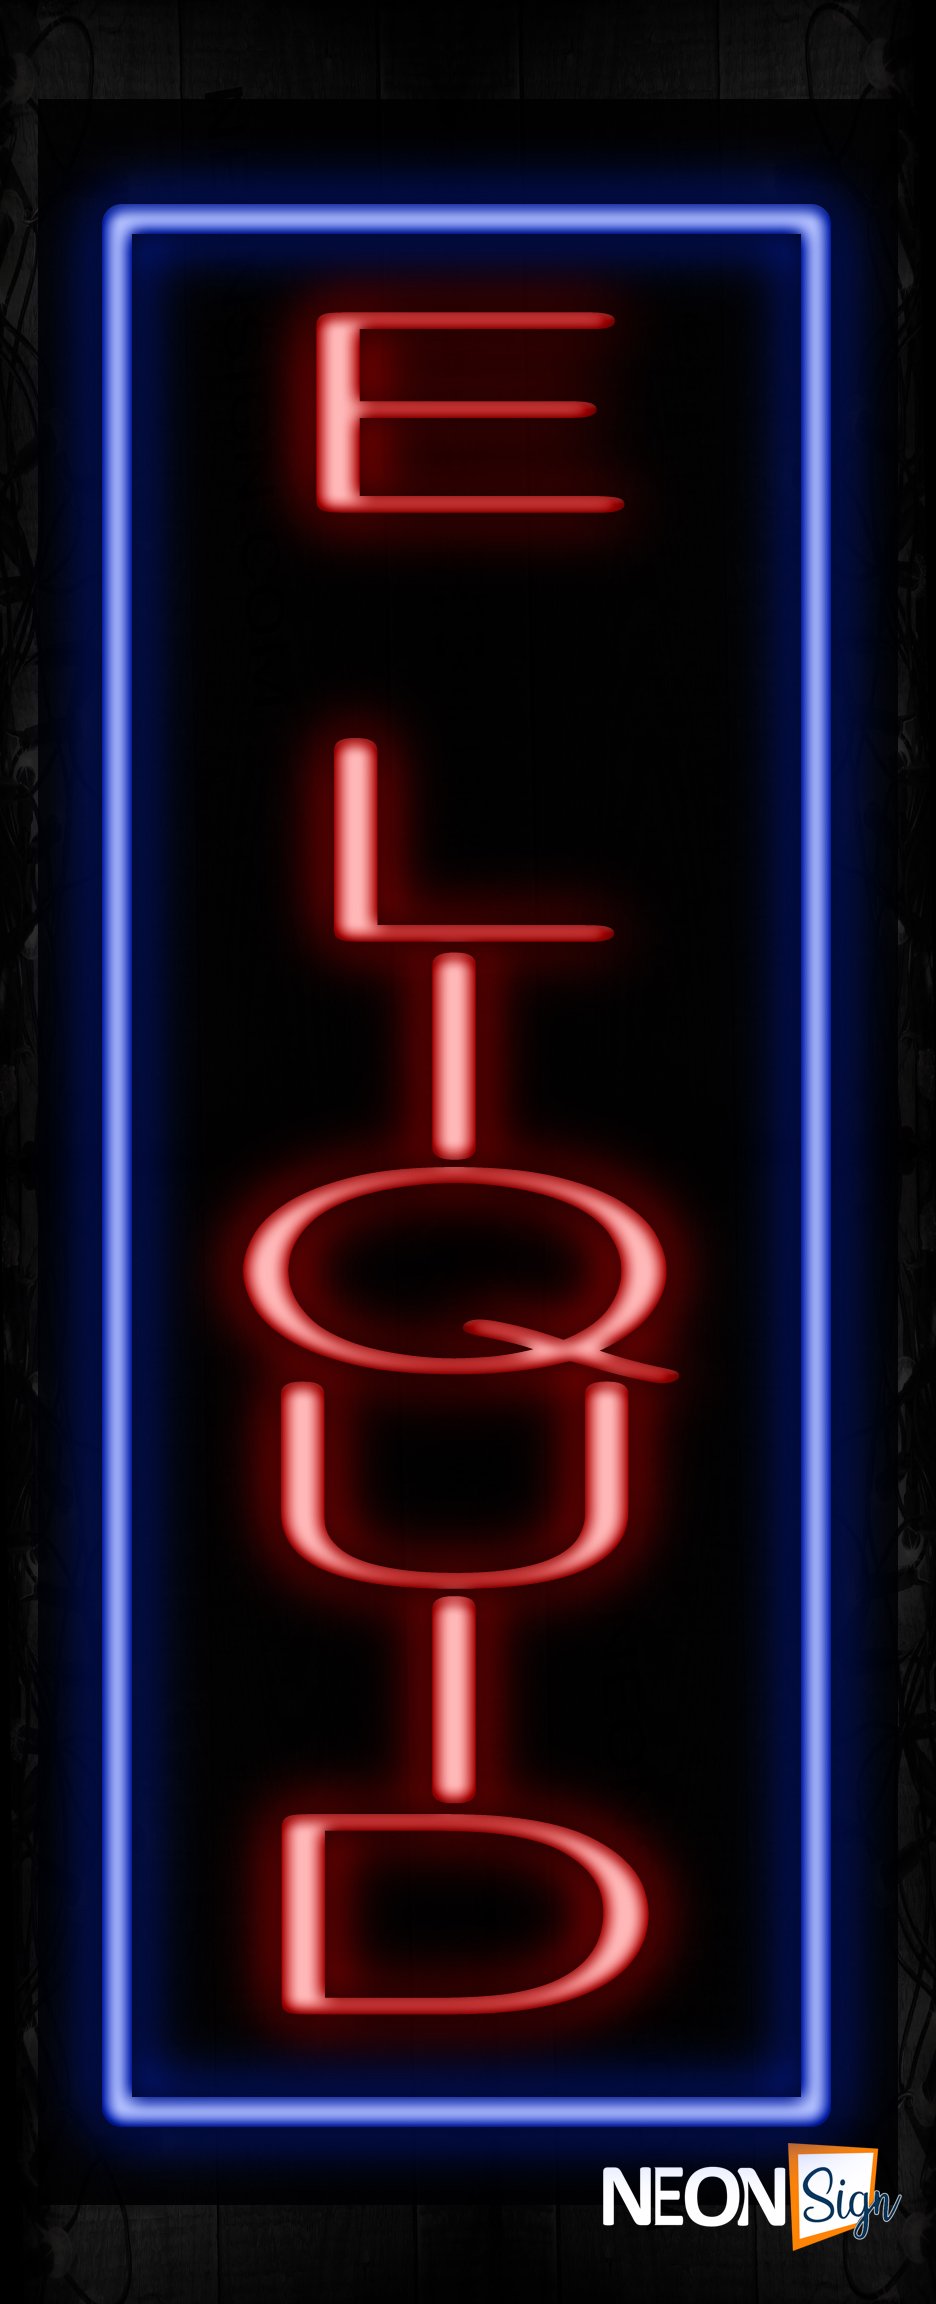 Image of 11551 E Liquid with border Neon Sign_ 32x12 Black Backing